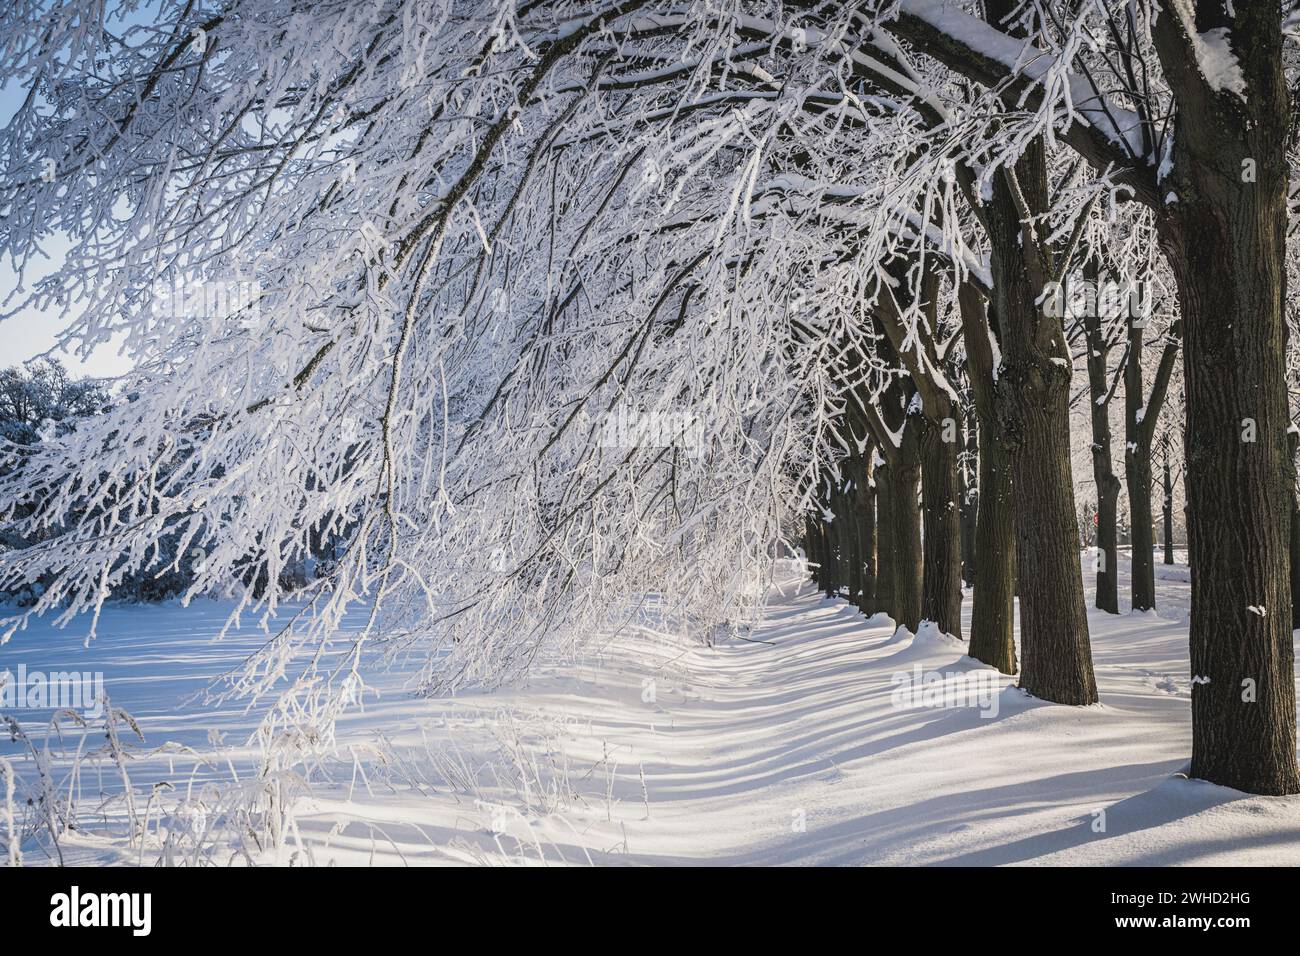 Snow-covered trees on an avenue on a cold, sunny day in winter Stock Photo